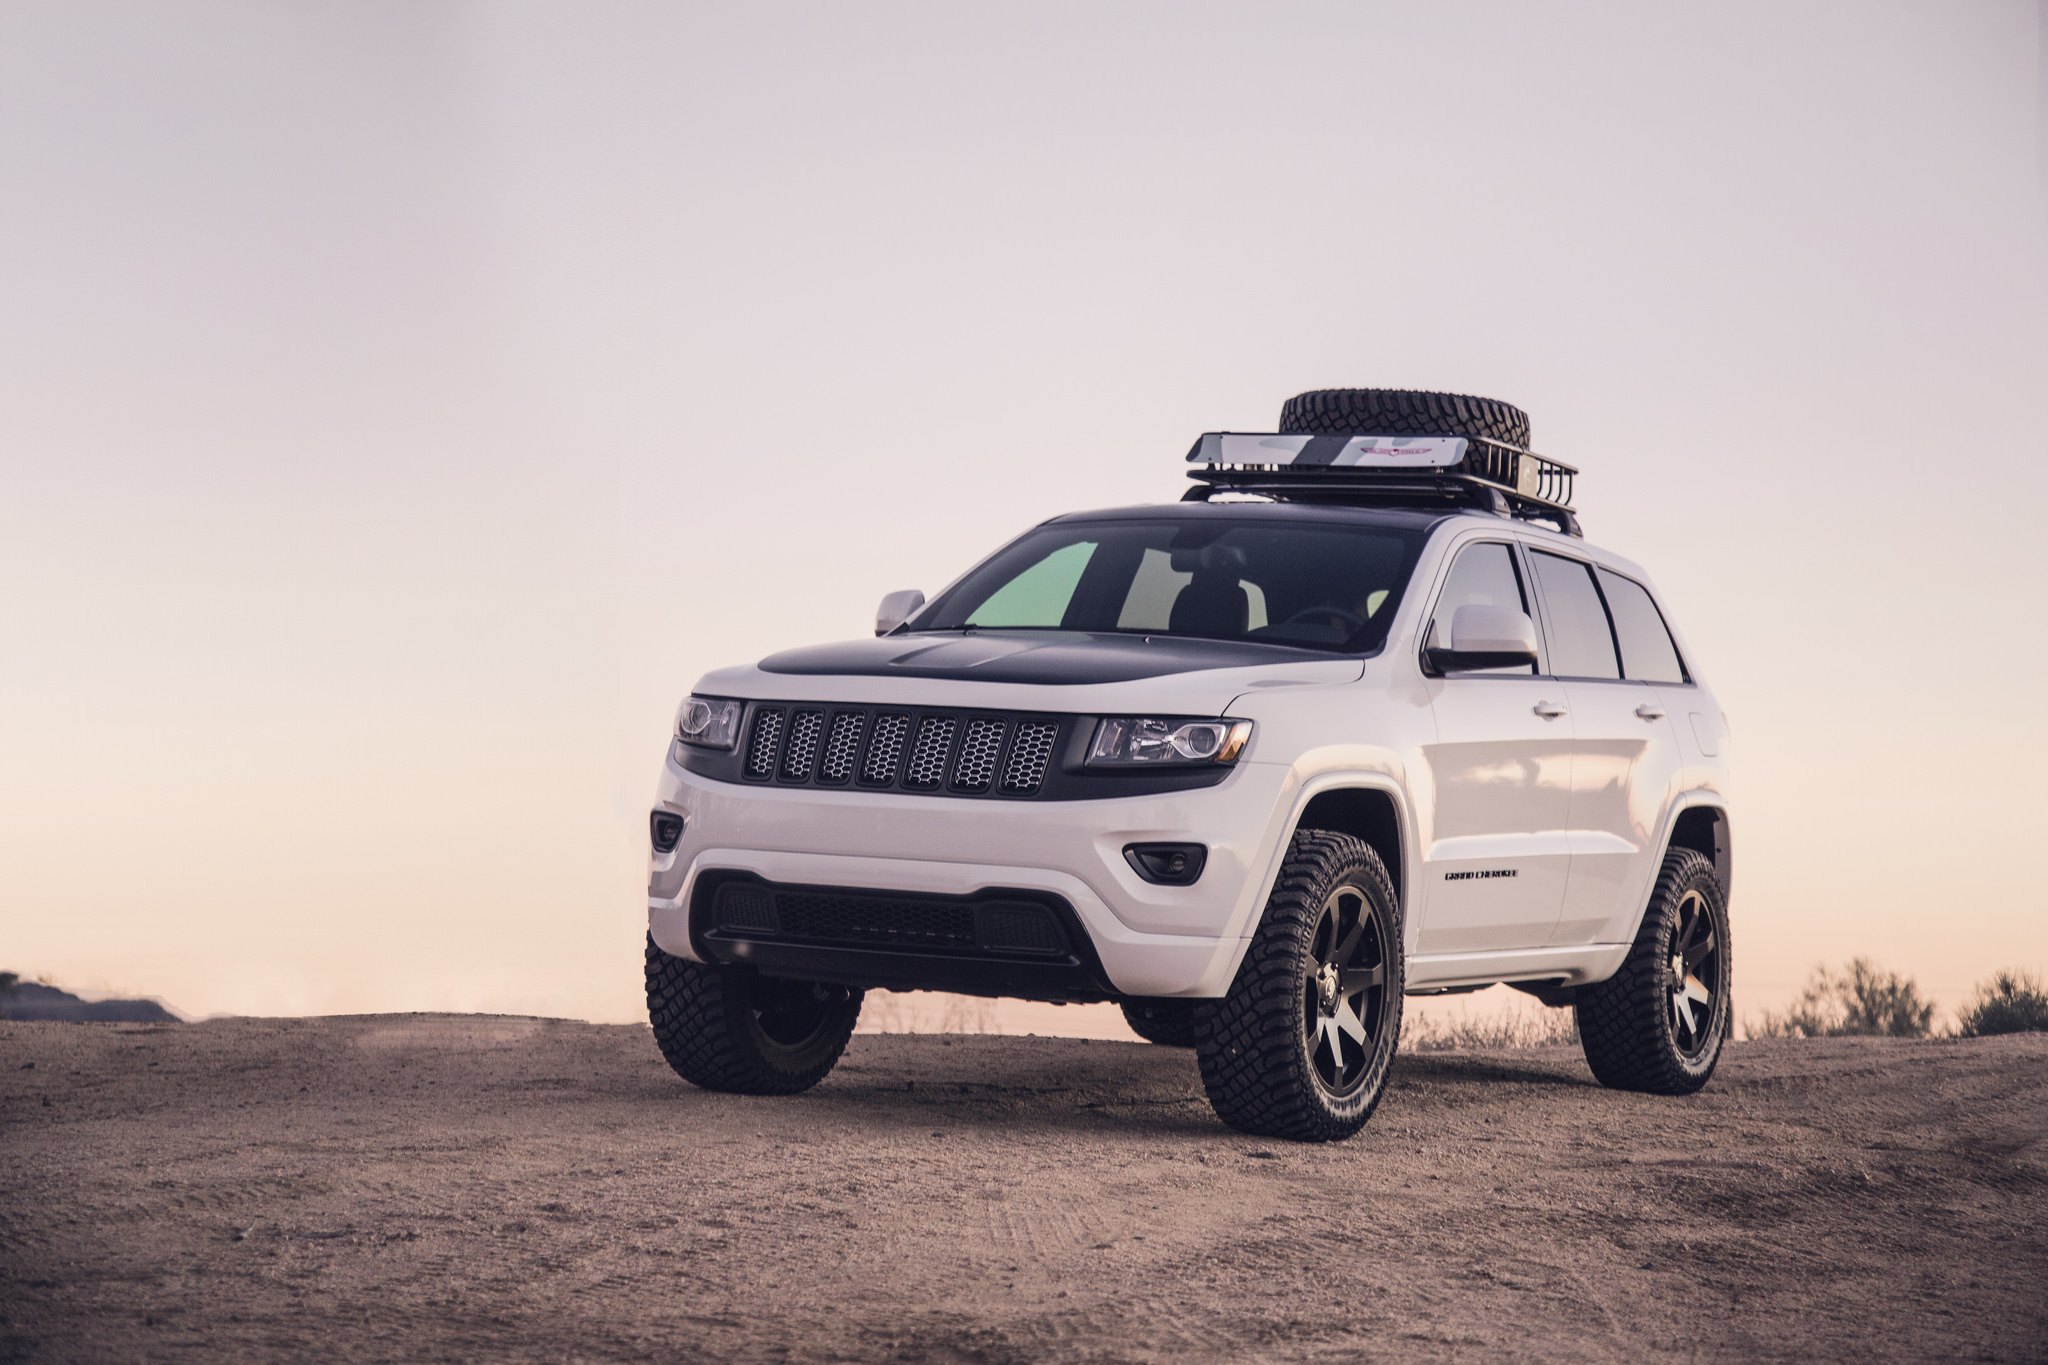 Weekend Warrior - Jeep Grand Cherokee With Expedition Rack - Photo by Black Rhino